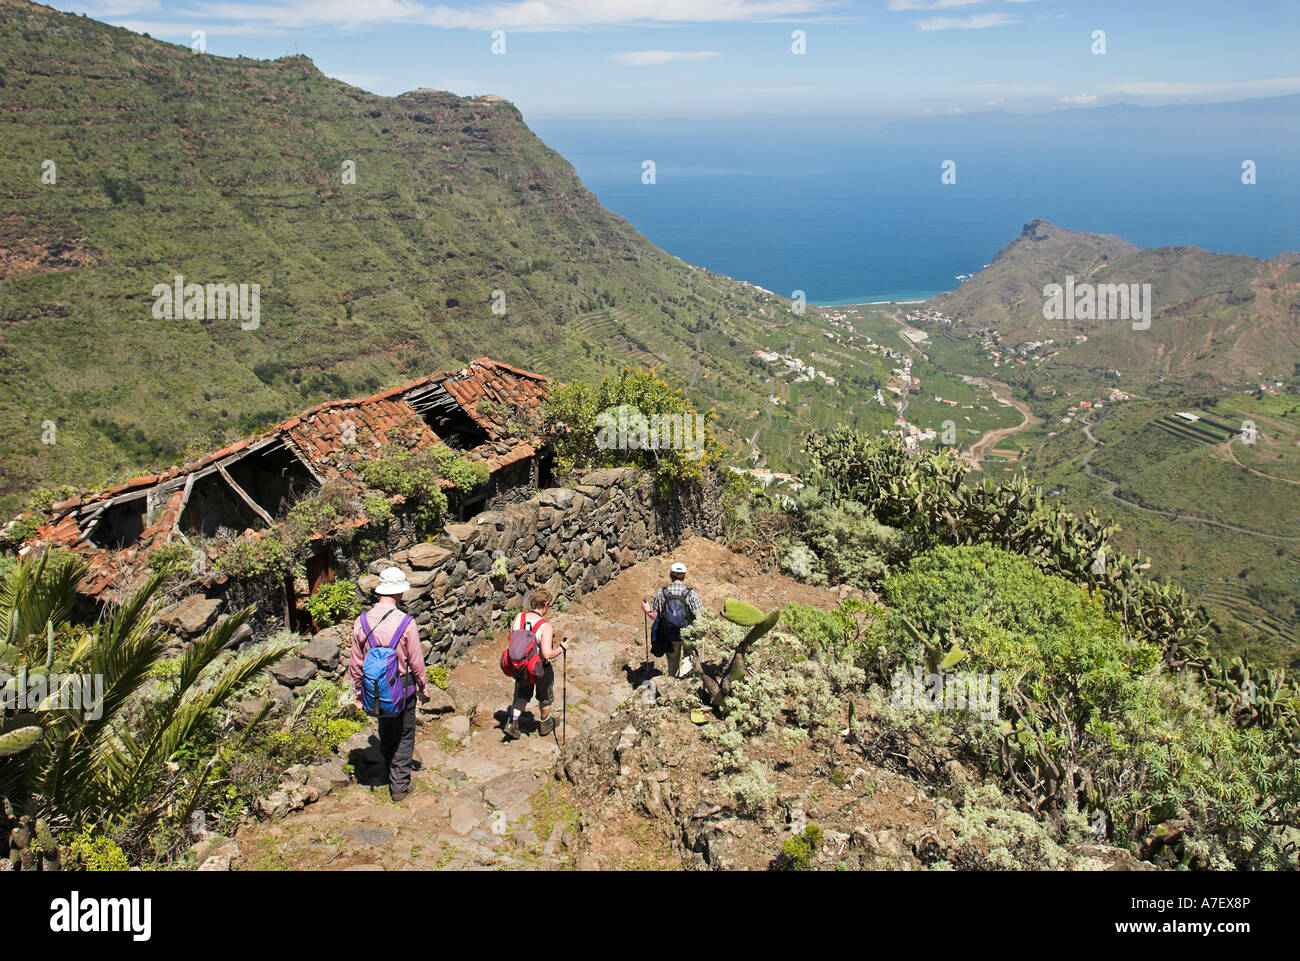 Hiker passing a tumbledown house in the valley of Hermigua, La Gomera Island, Canary Islands, Spain, Europe Stock Photo